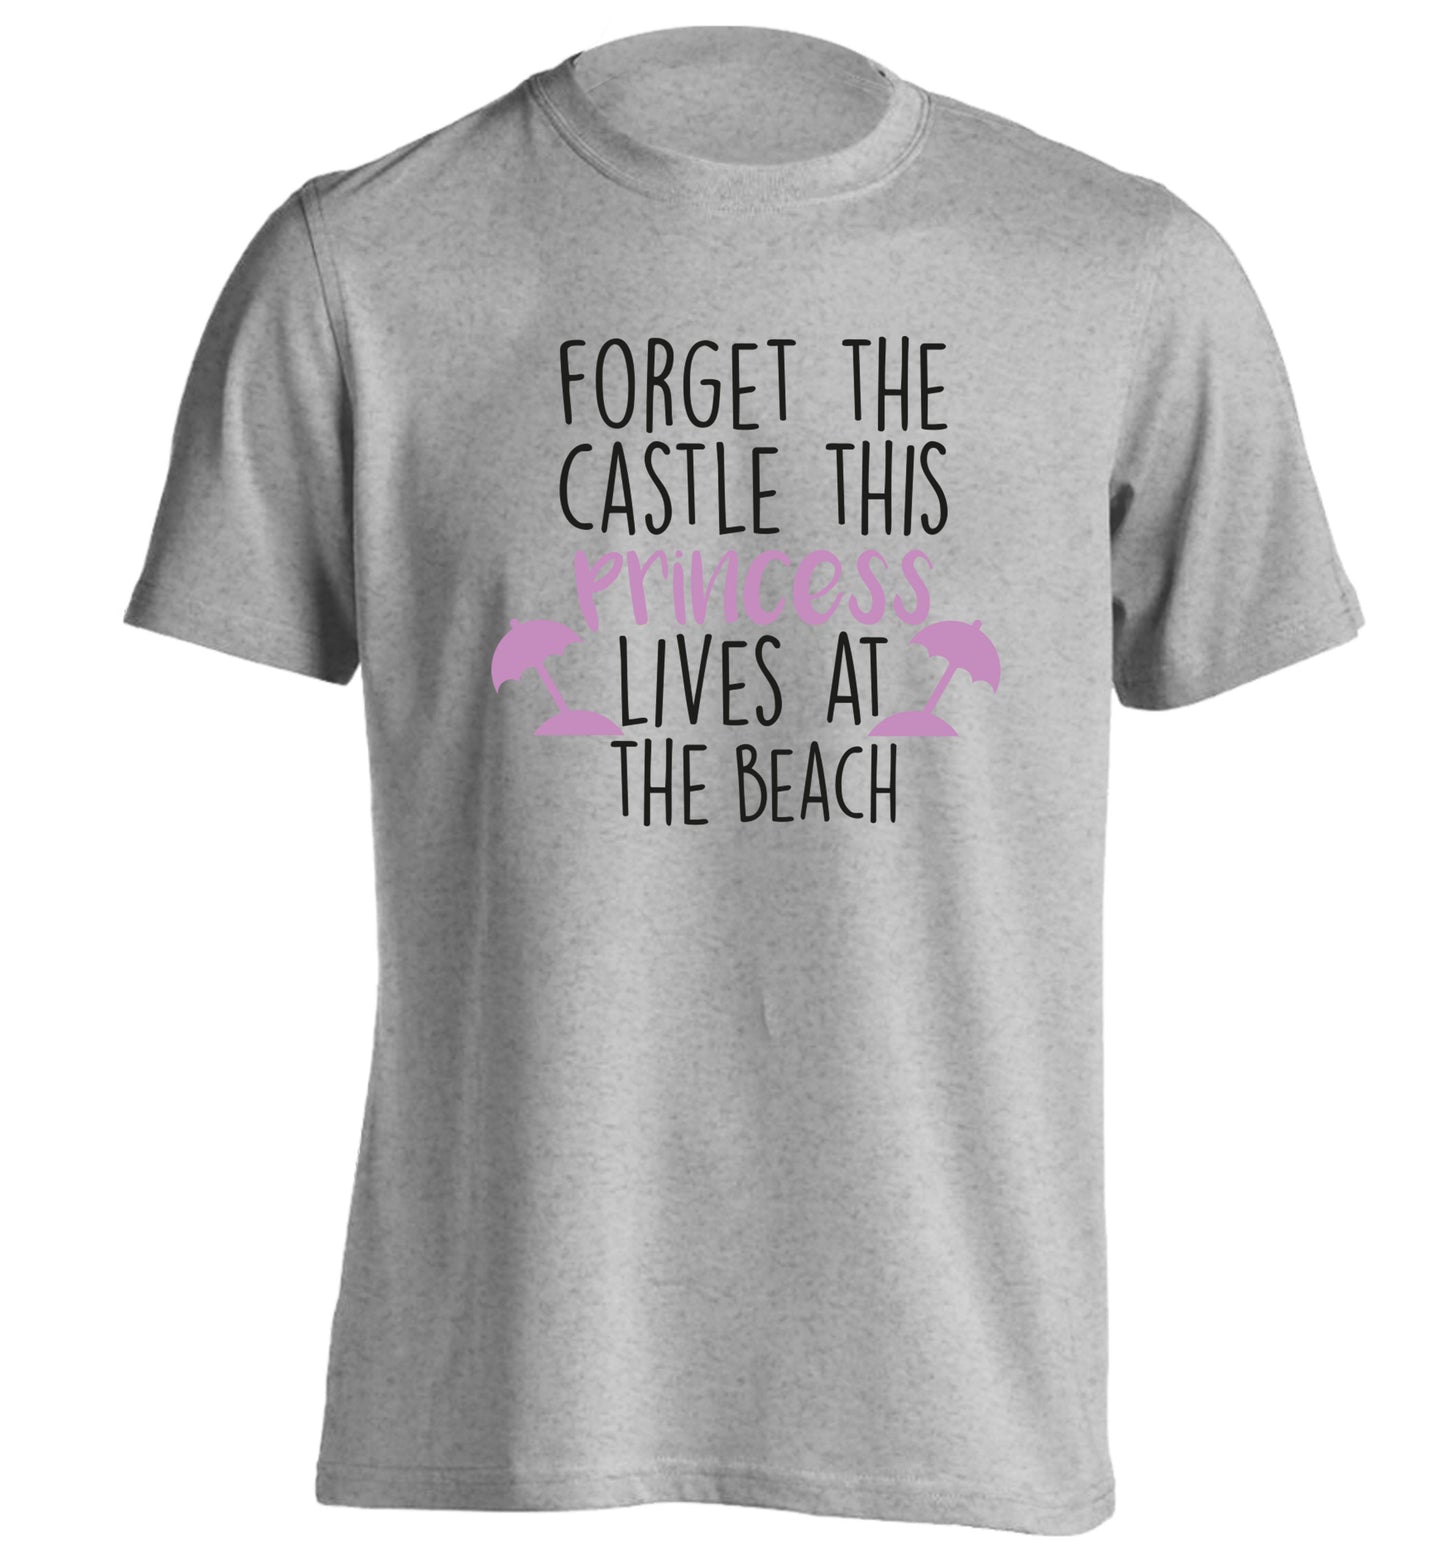 Forget the castle this princess lives at the beach adults unisex grey Tshirt 2XL